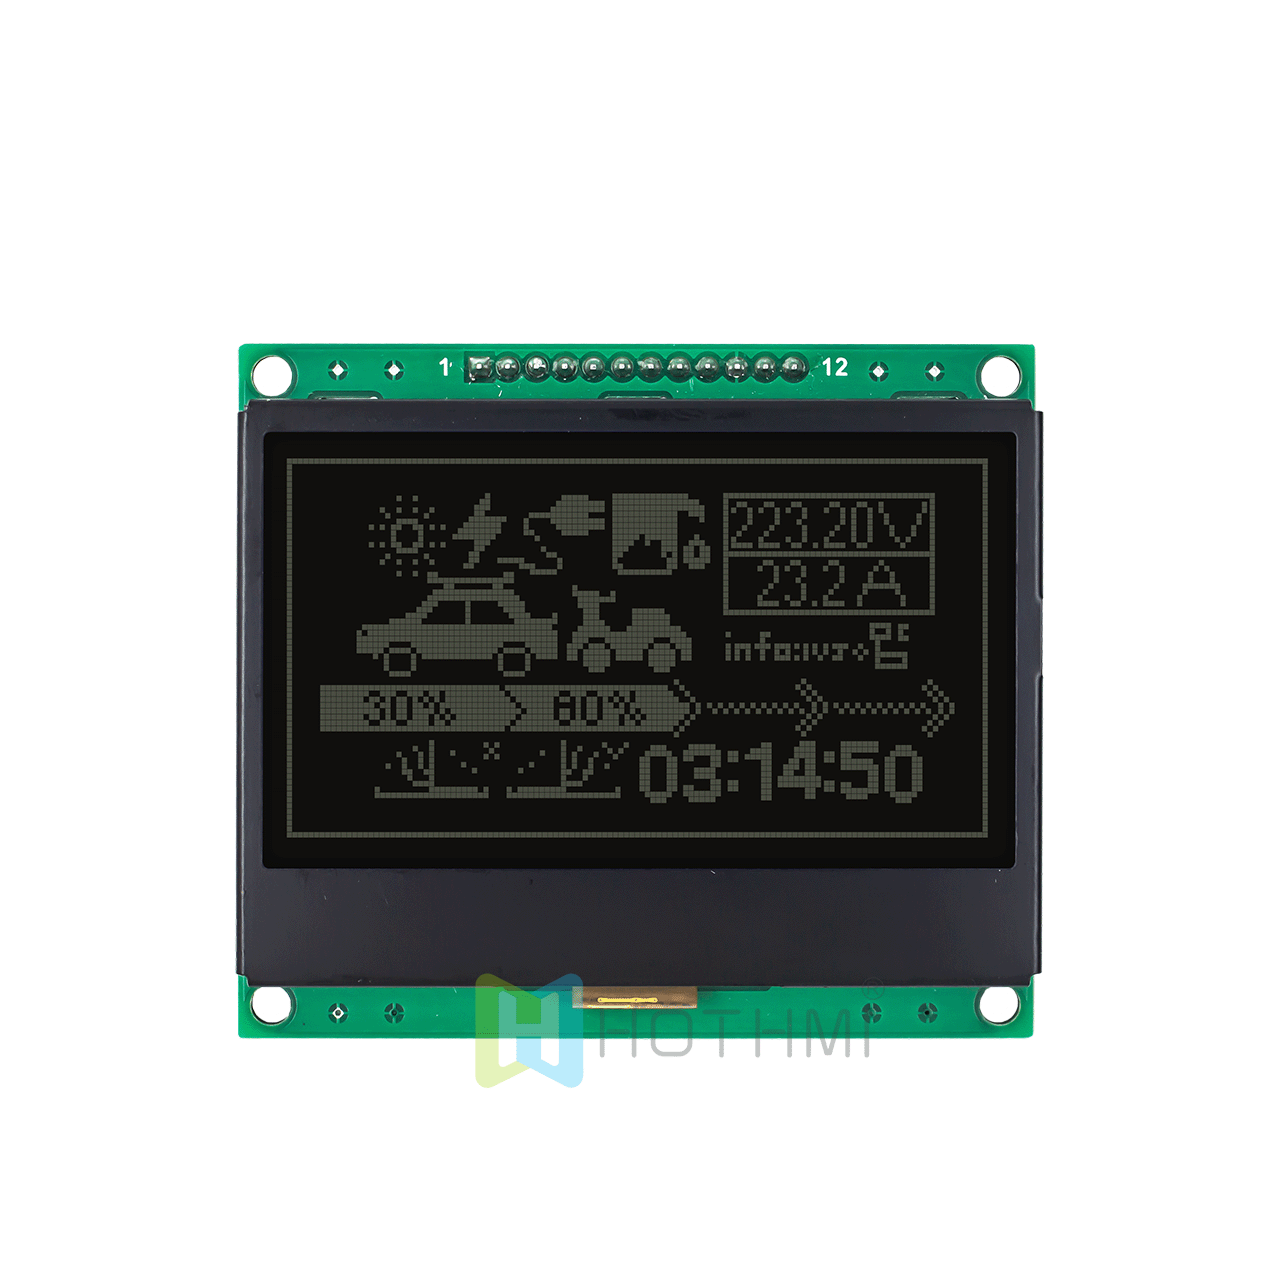 3 Inch 128x64 Graphic LCD Display Module | 128x64 Graphic LCD Module | SPI Interface | White on Black | DFSTN Negative | Adruino